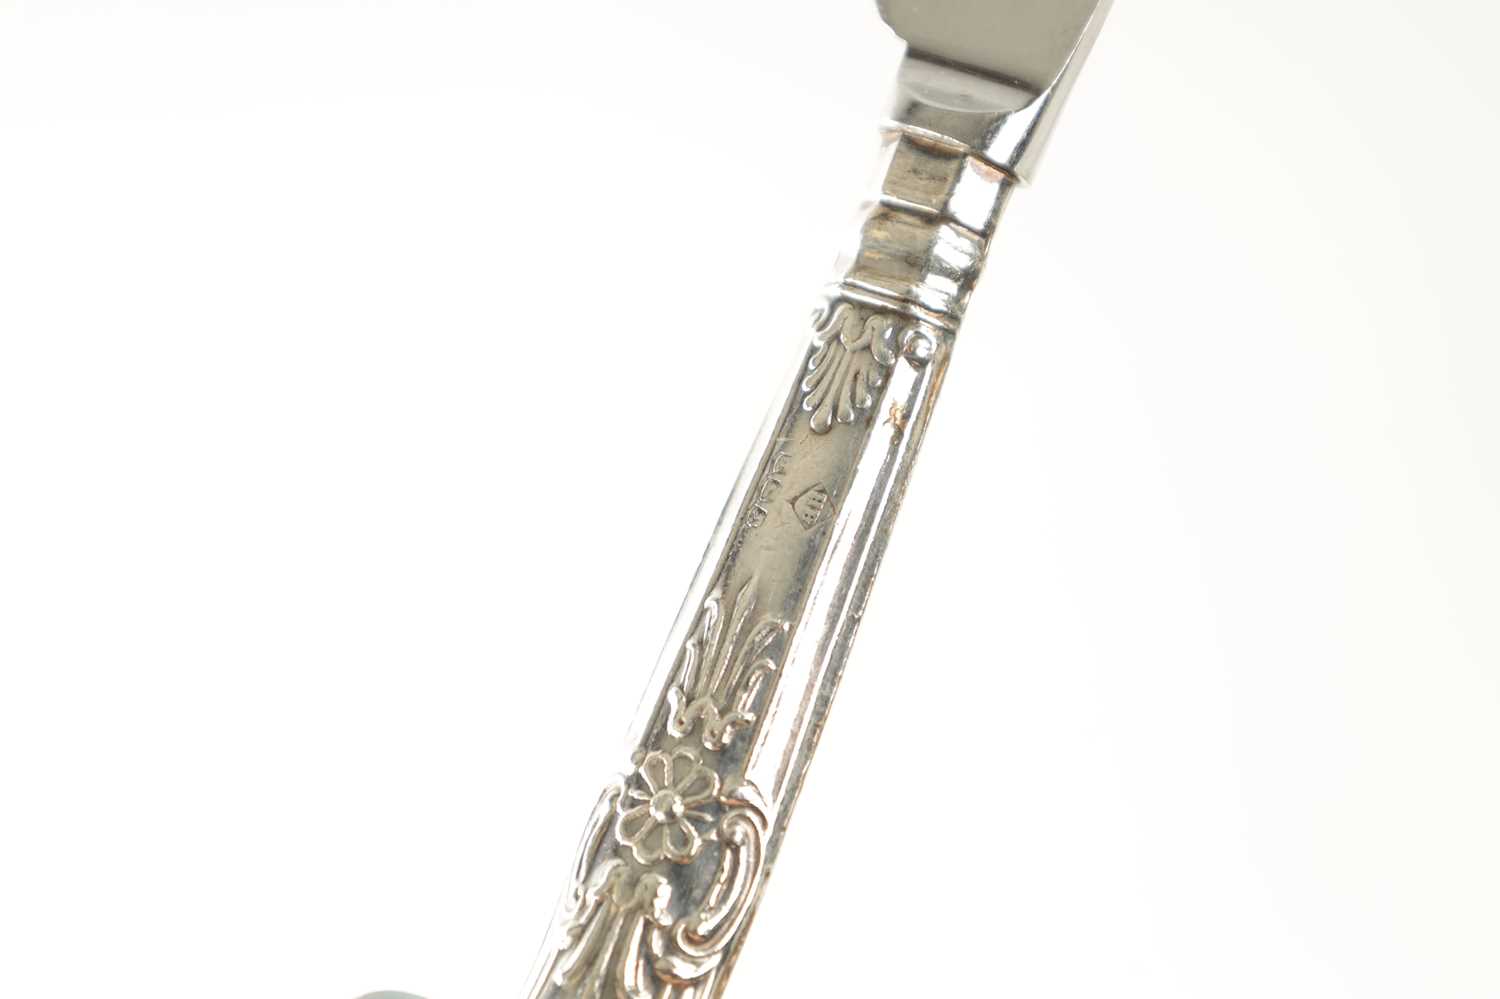 A CASED SET OF GEORGIAN-STYLE SILVER TEASPOONS AND CASED CAKE KNIVES - Image 7 of 7